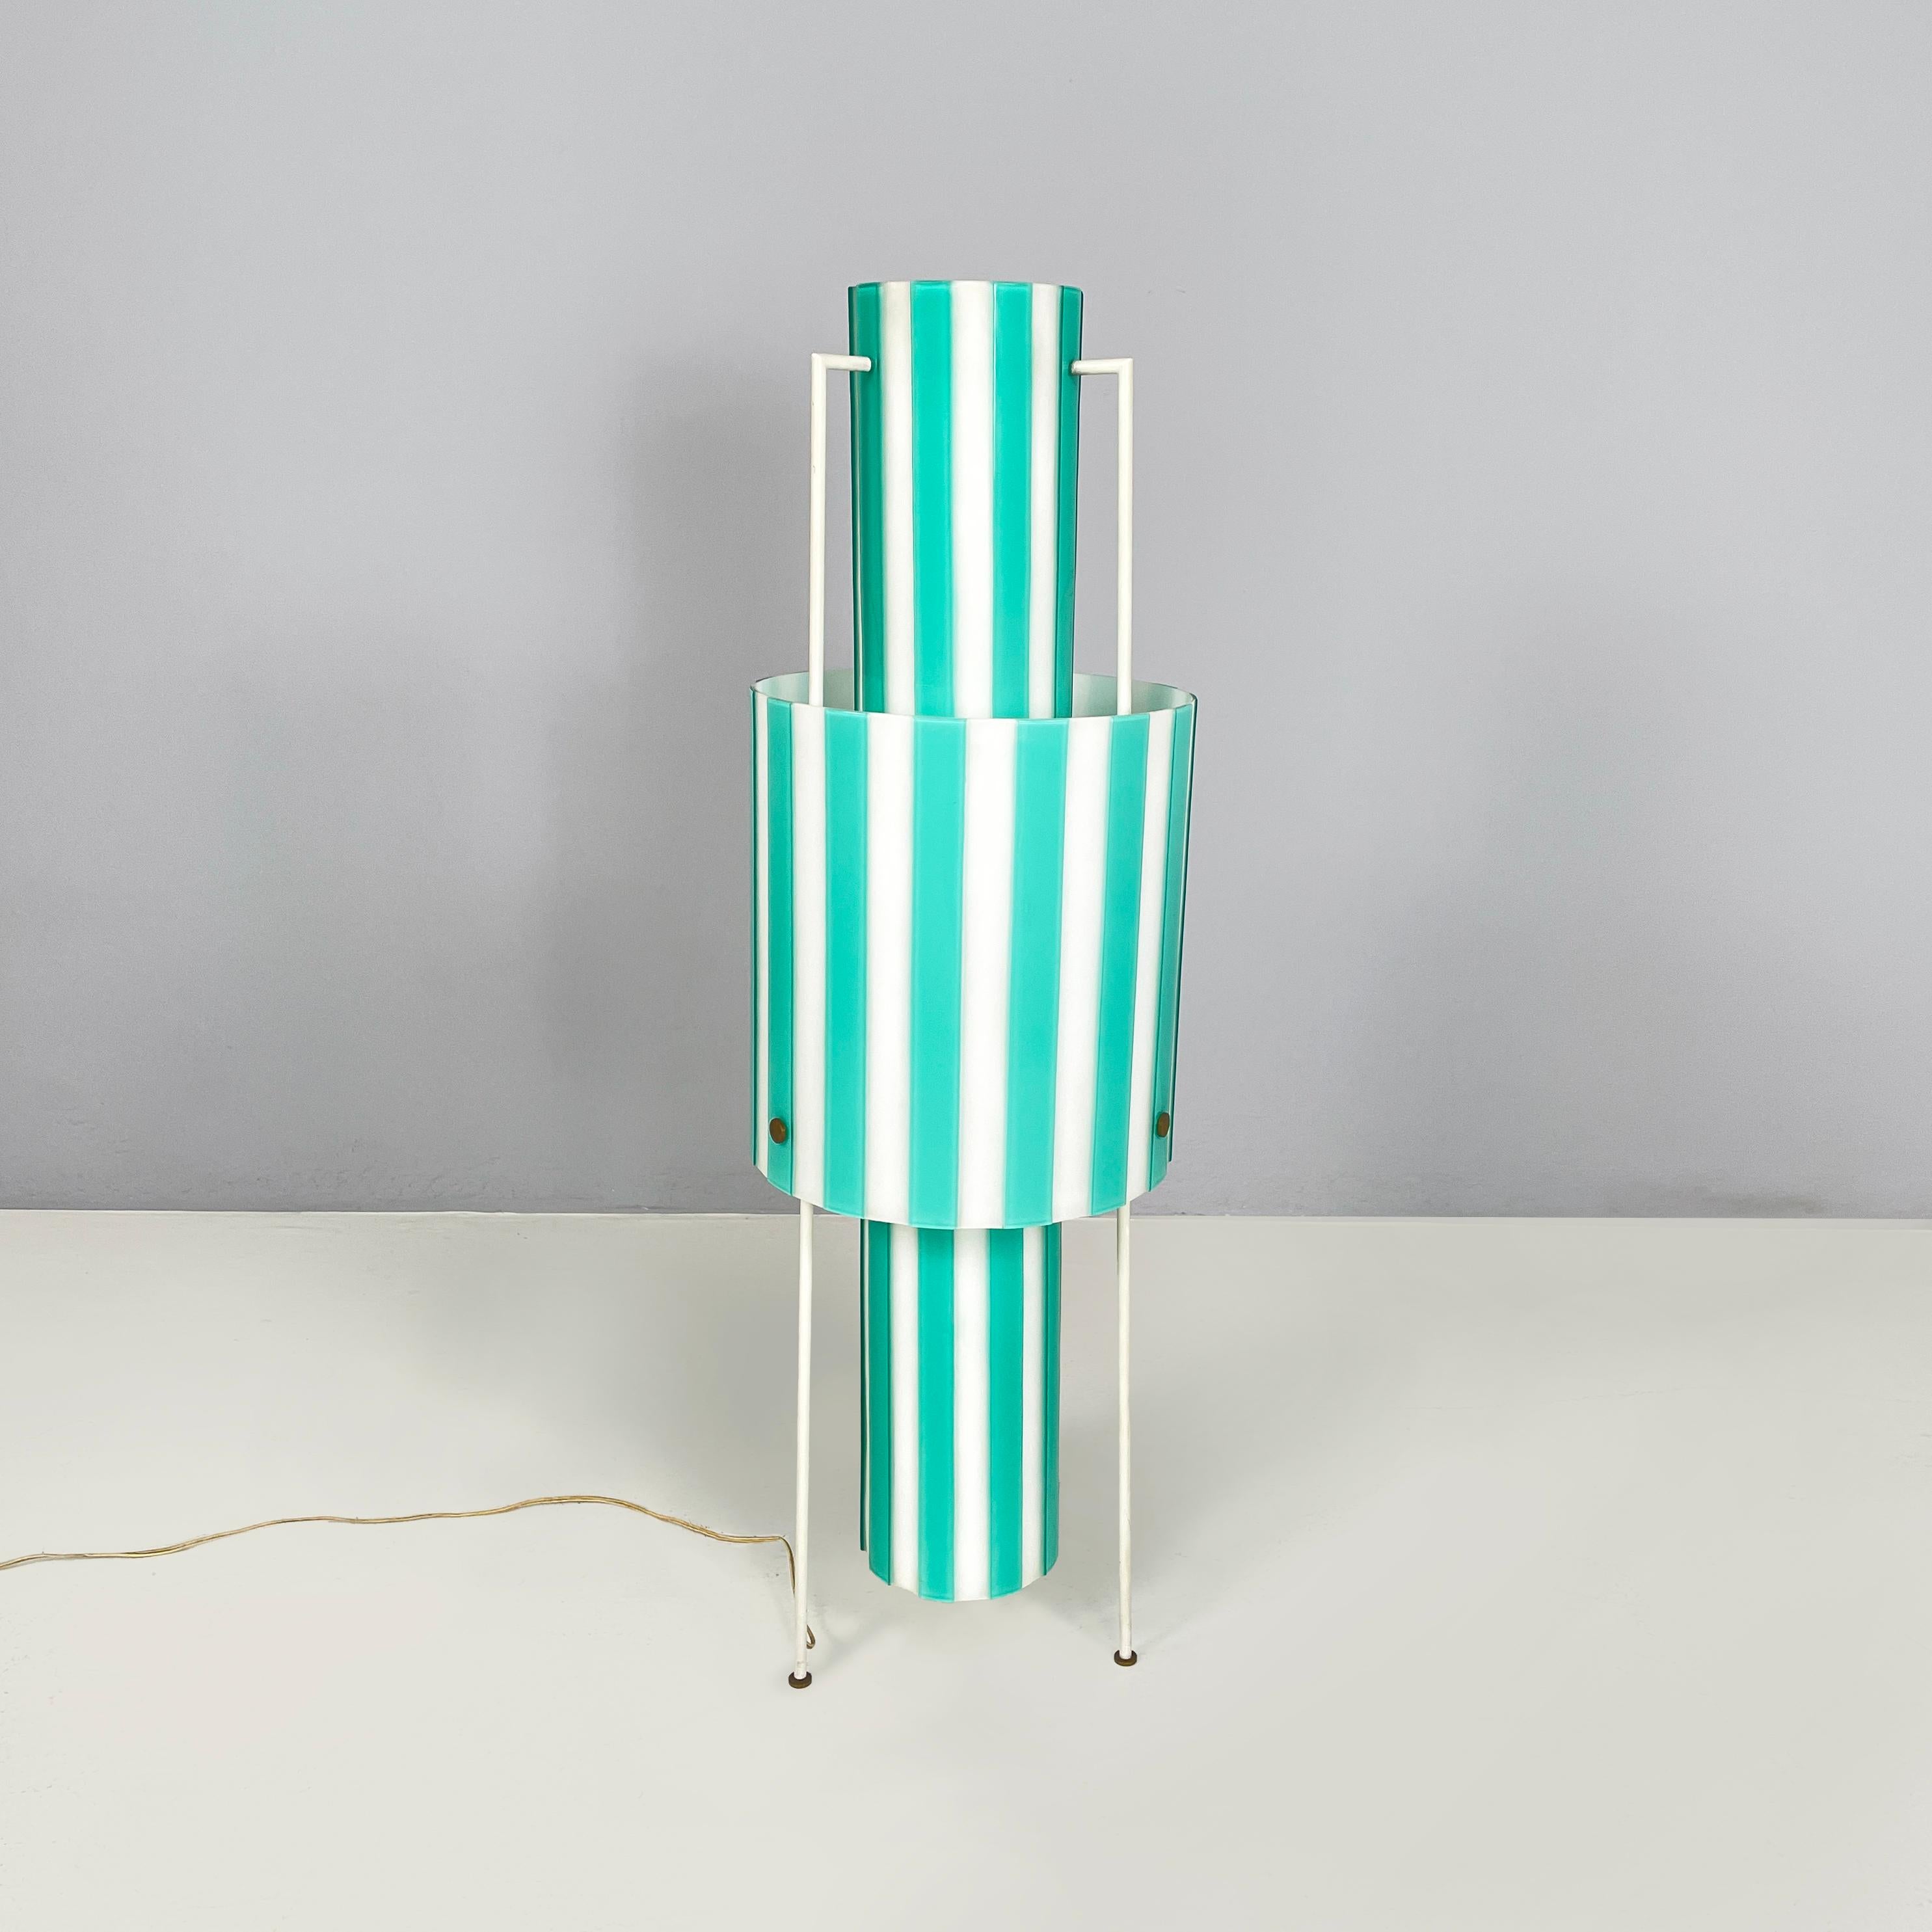 Italian mid-century modern Floor lamp in white and light blue glass with metal, 1950s
Floor lamp in handmade glass in white with tiffany blue raised stripes. The structure is made up of two cylinders, one inside the other: a wider and lower external